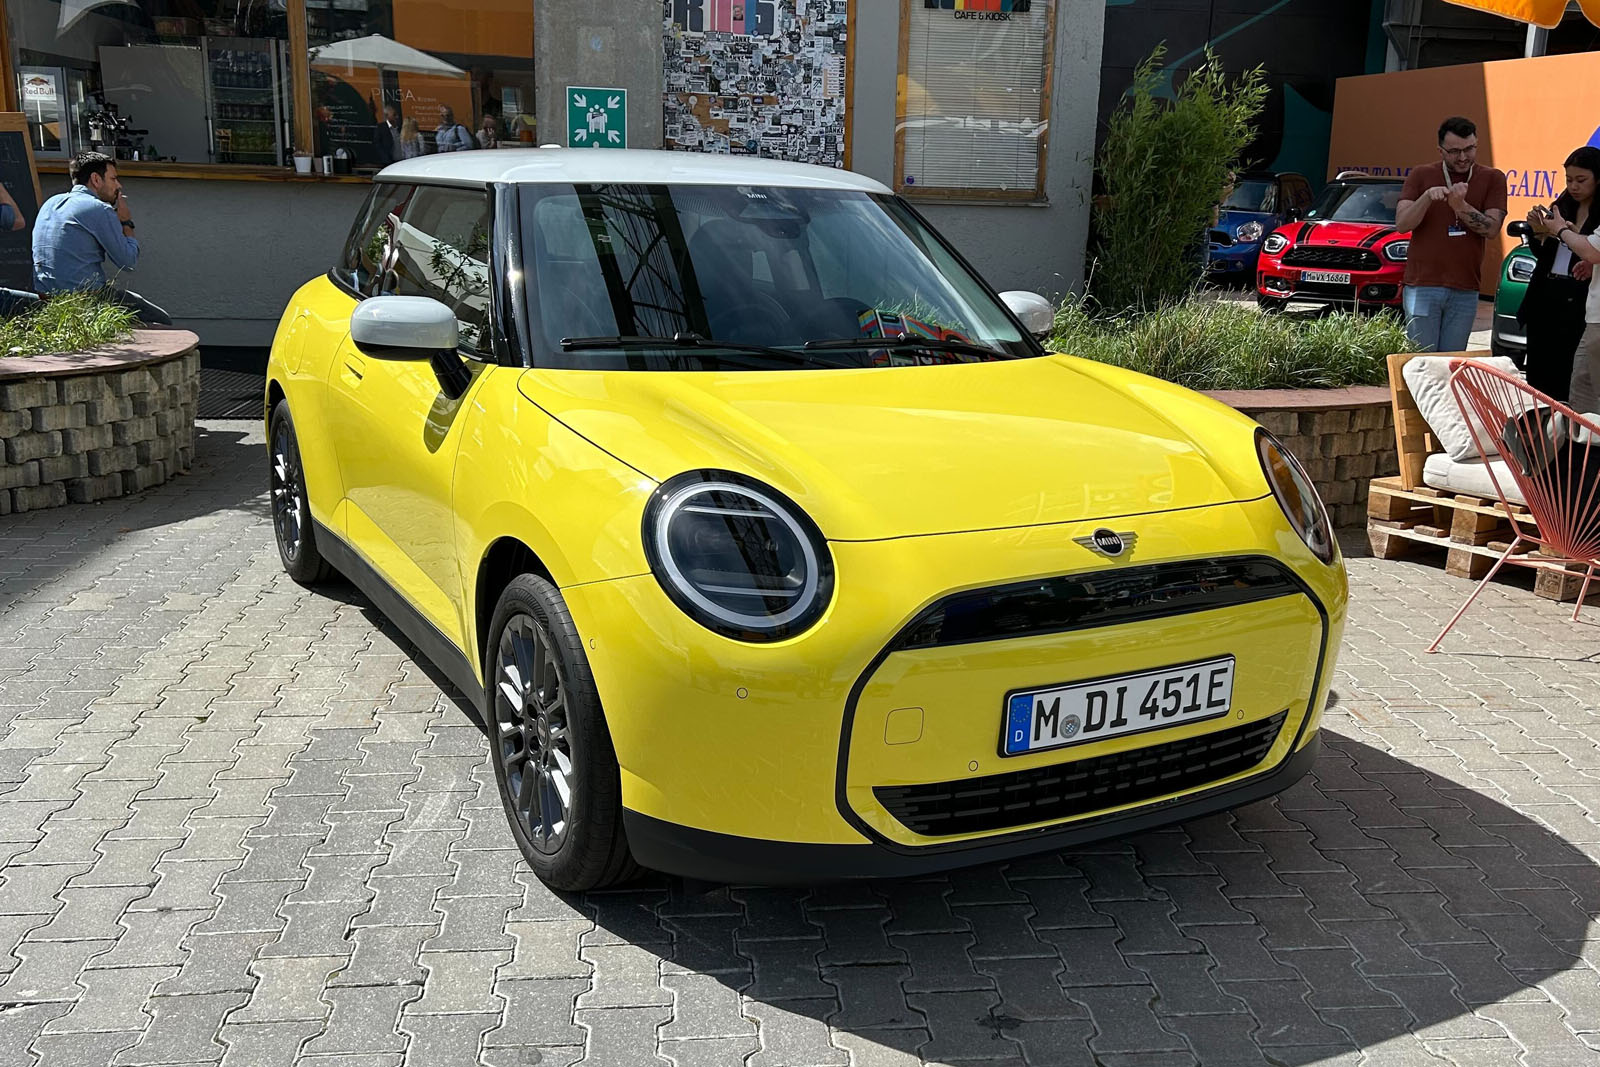 https://www.autocar.co.uk/sites/autocar.co.uk/files/images/car-reviews/first-drives/legacy/mini-cooper-electric-2024-yellow-front.jpg